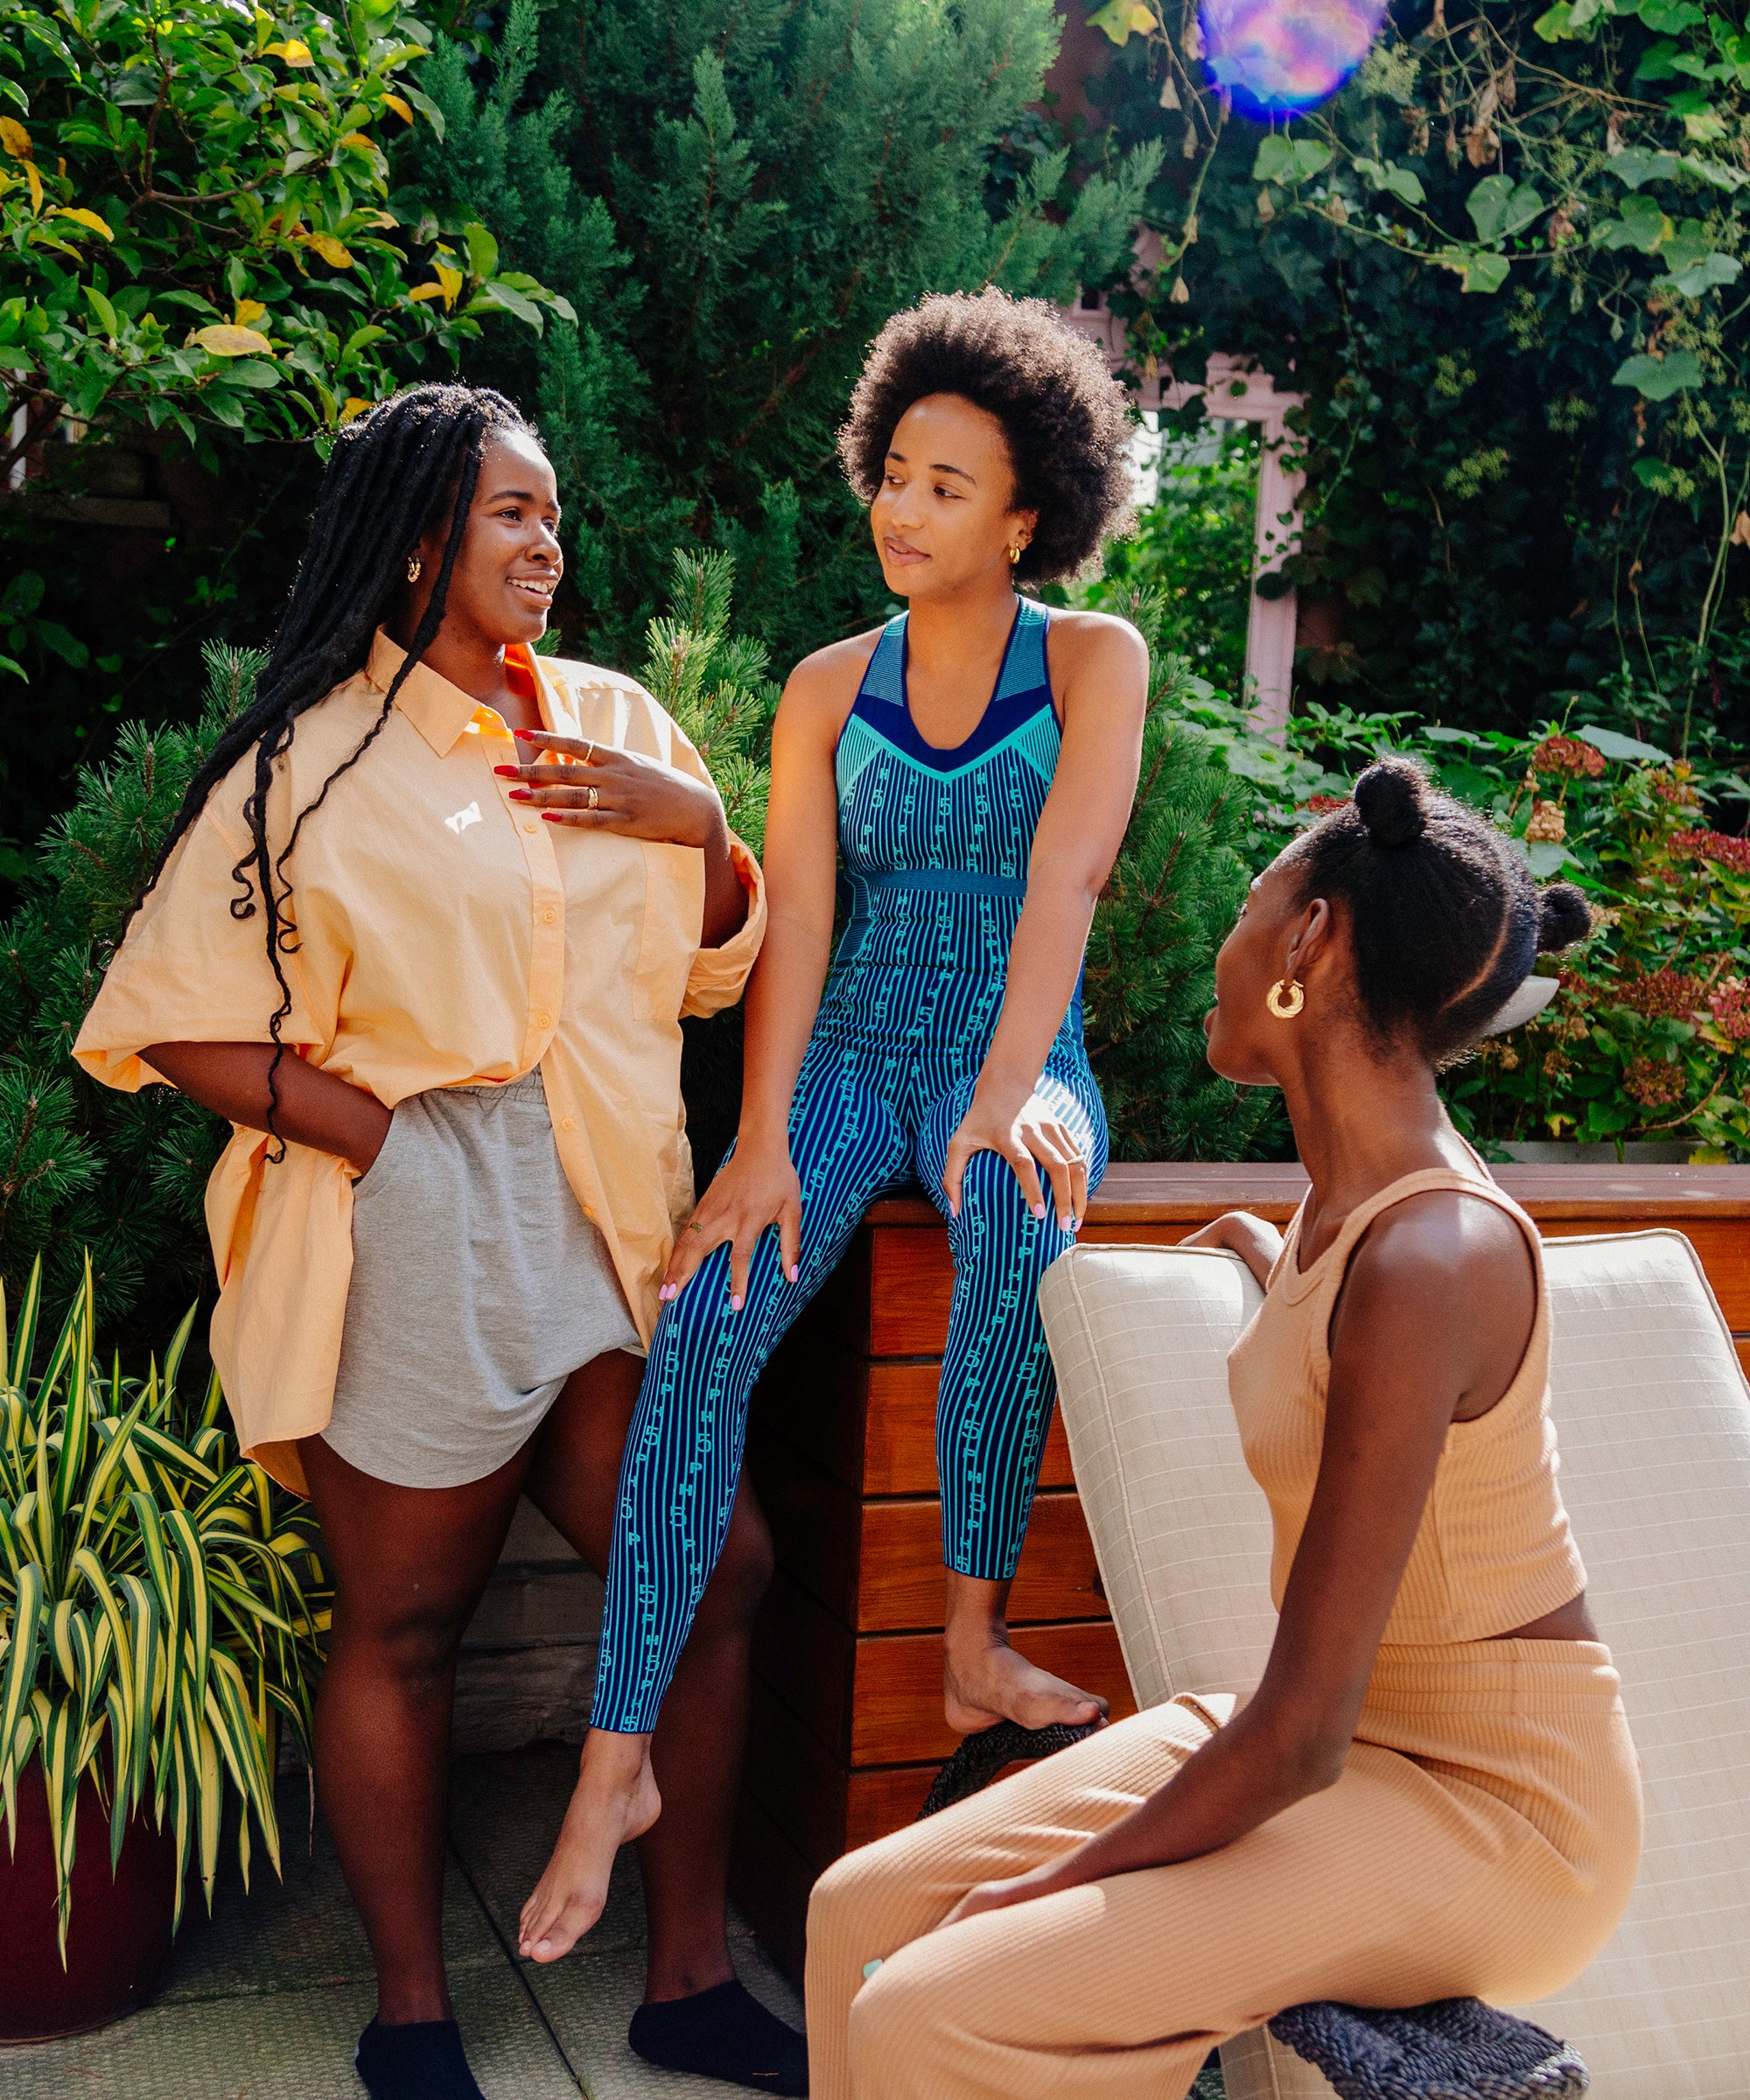 How To Navigate Soft Relationships As A Black Woman pic